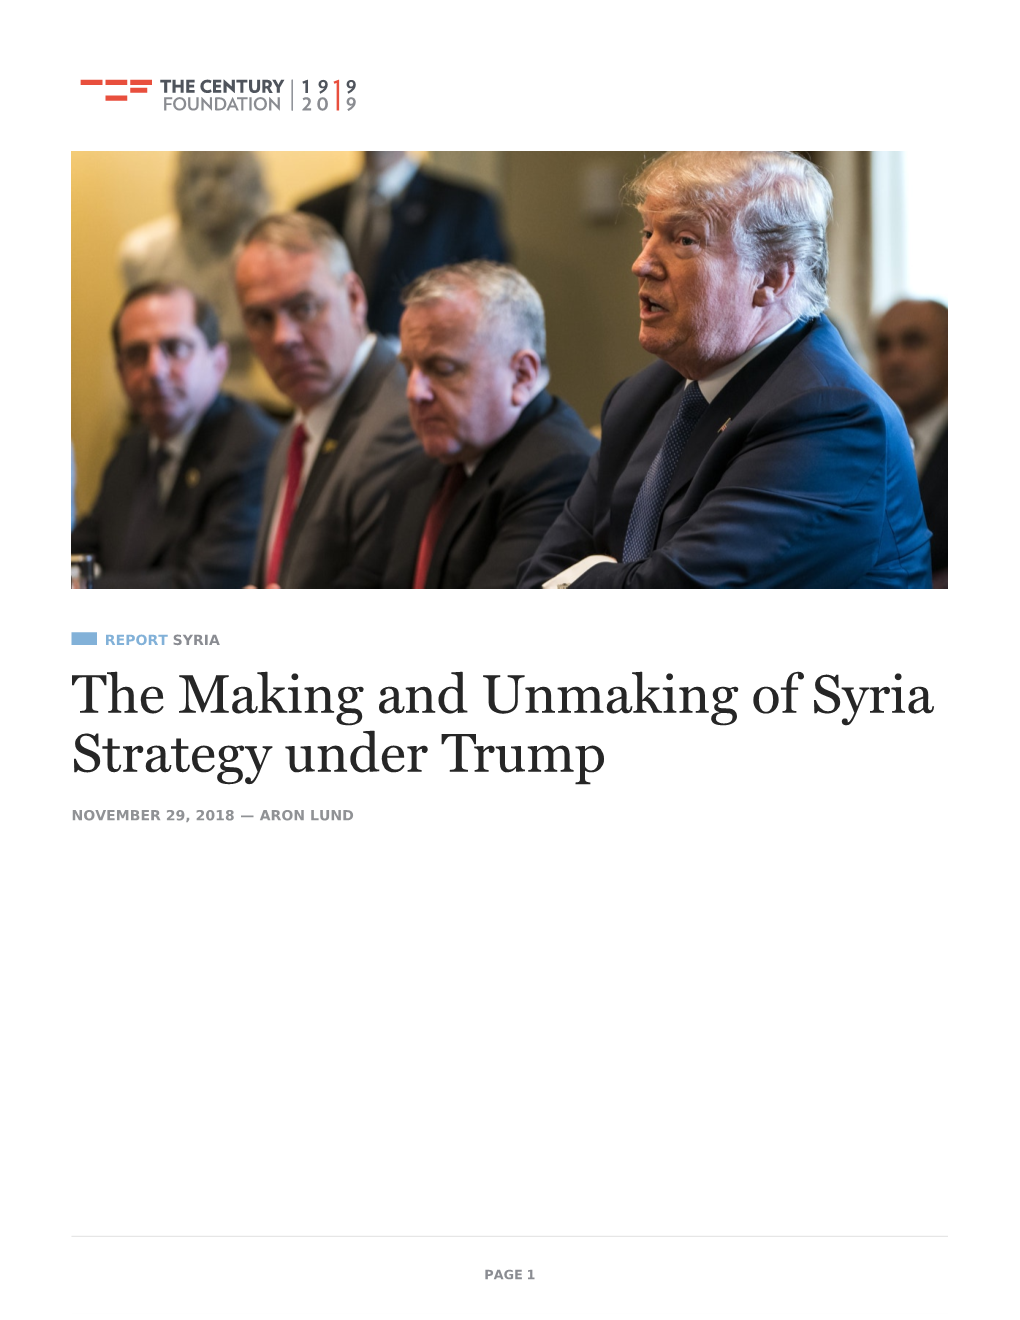 The Making and Unmaking of Syria Strategy Under Trump